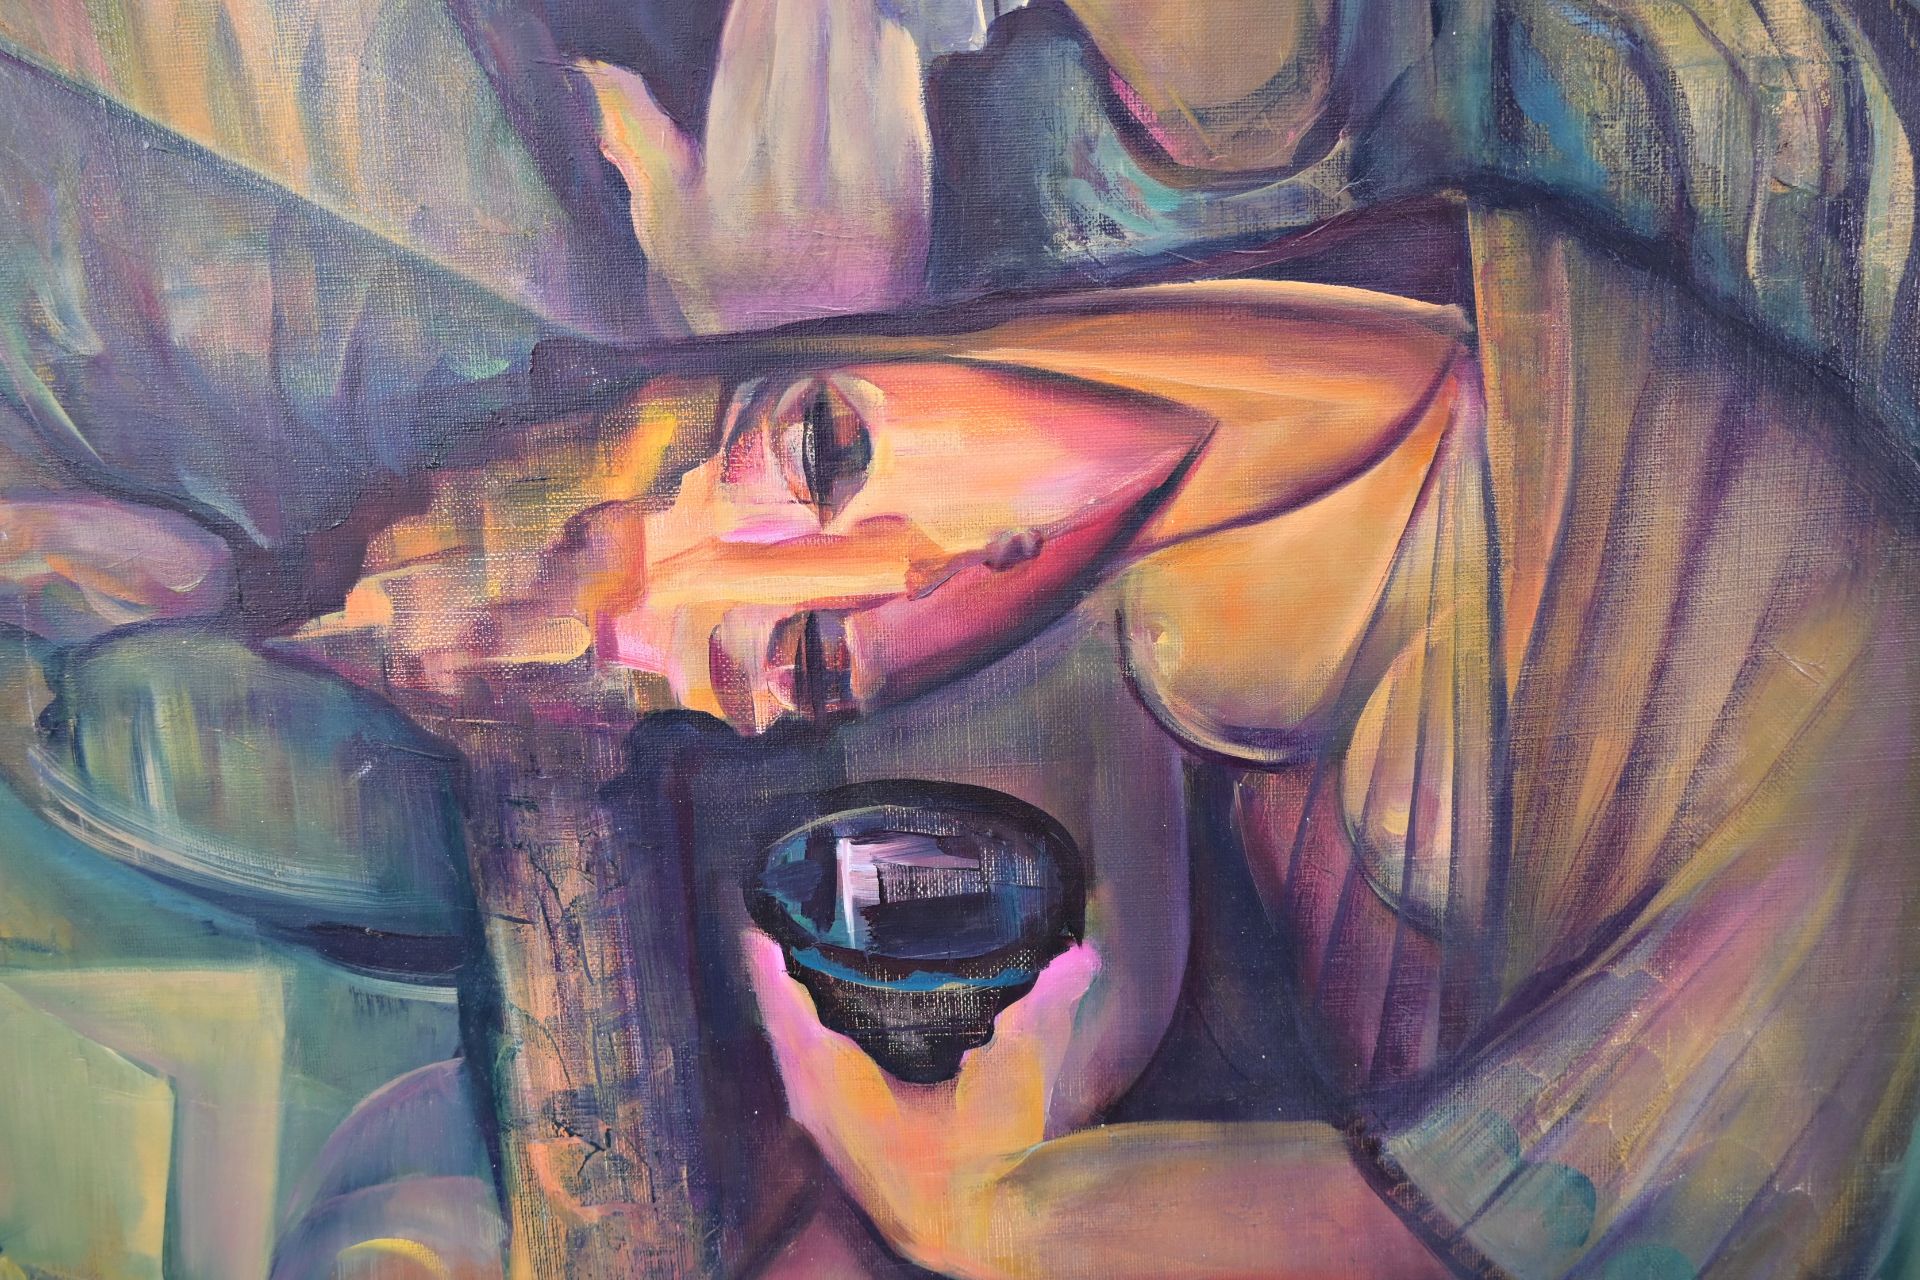 Gantsovskaia Lioudmila 2005, Cubism. Contemporary French Painting - Image 3 of 7